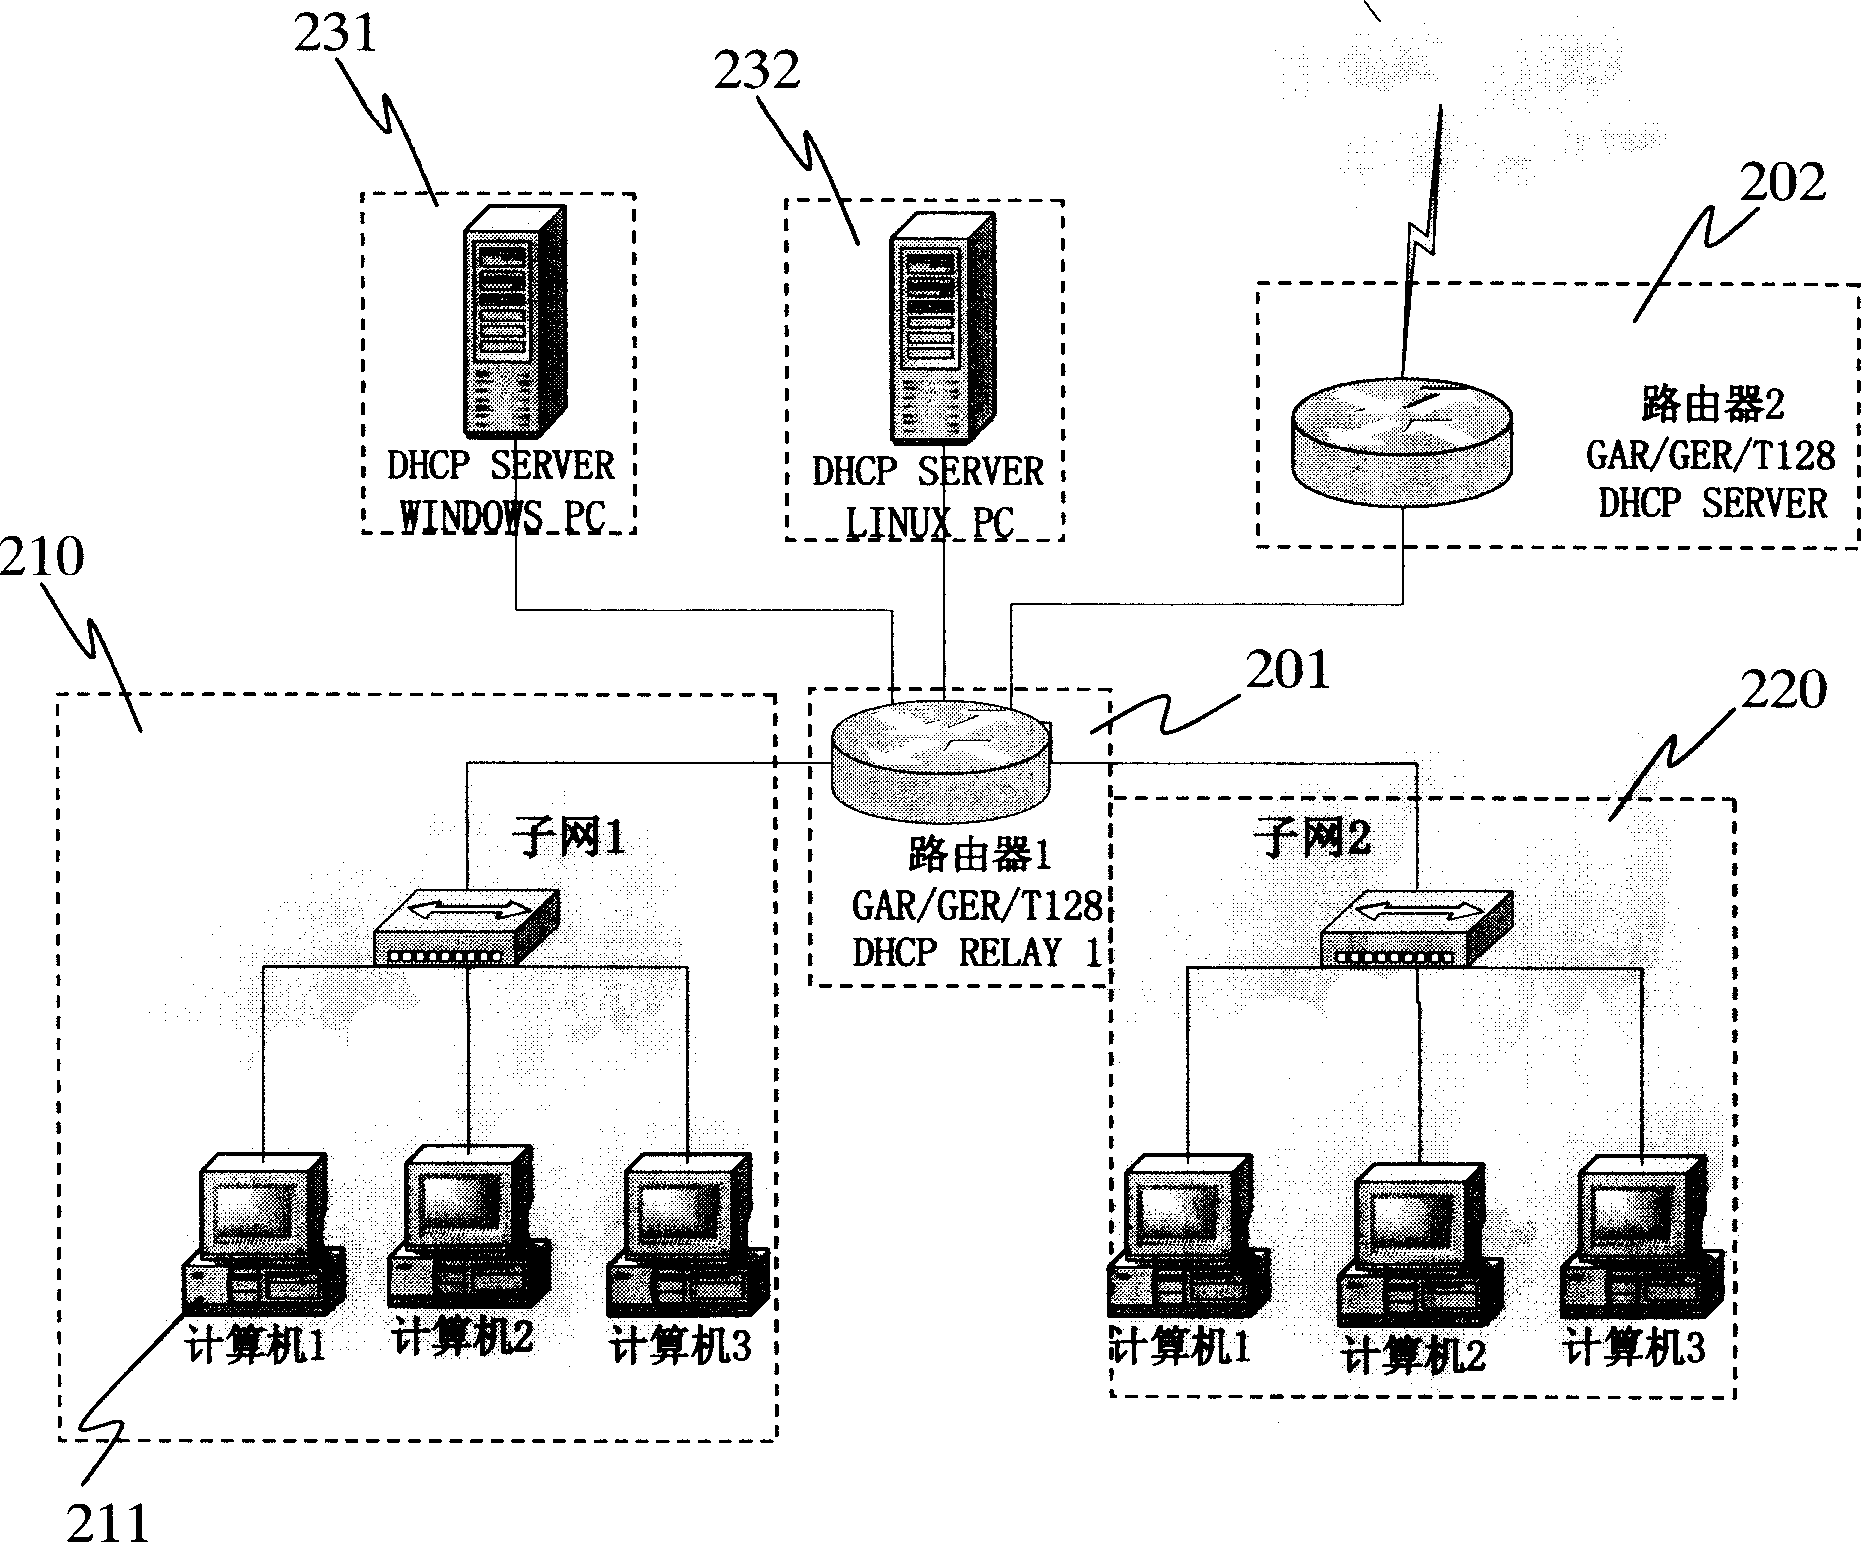 Distributed approach and system based on virtual interface under dynamic host configuration protocol